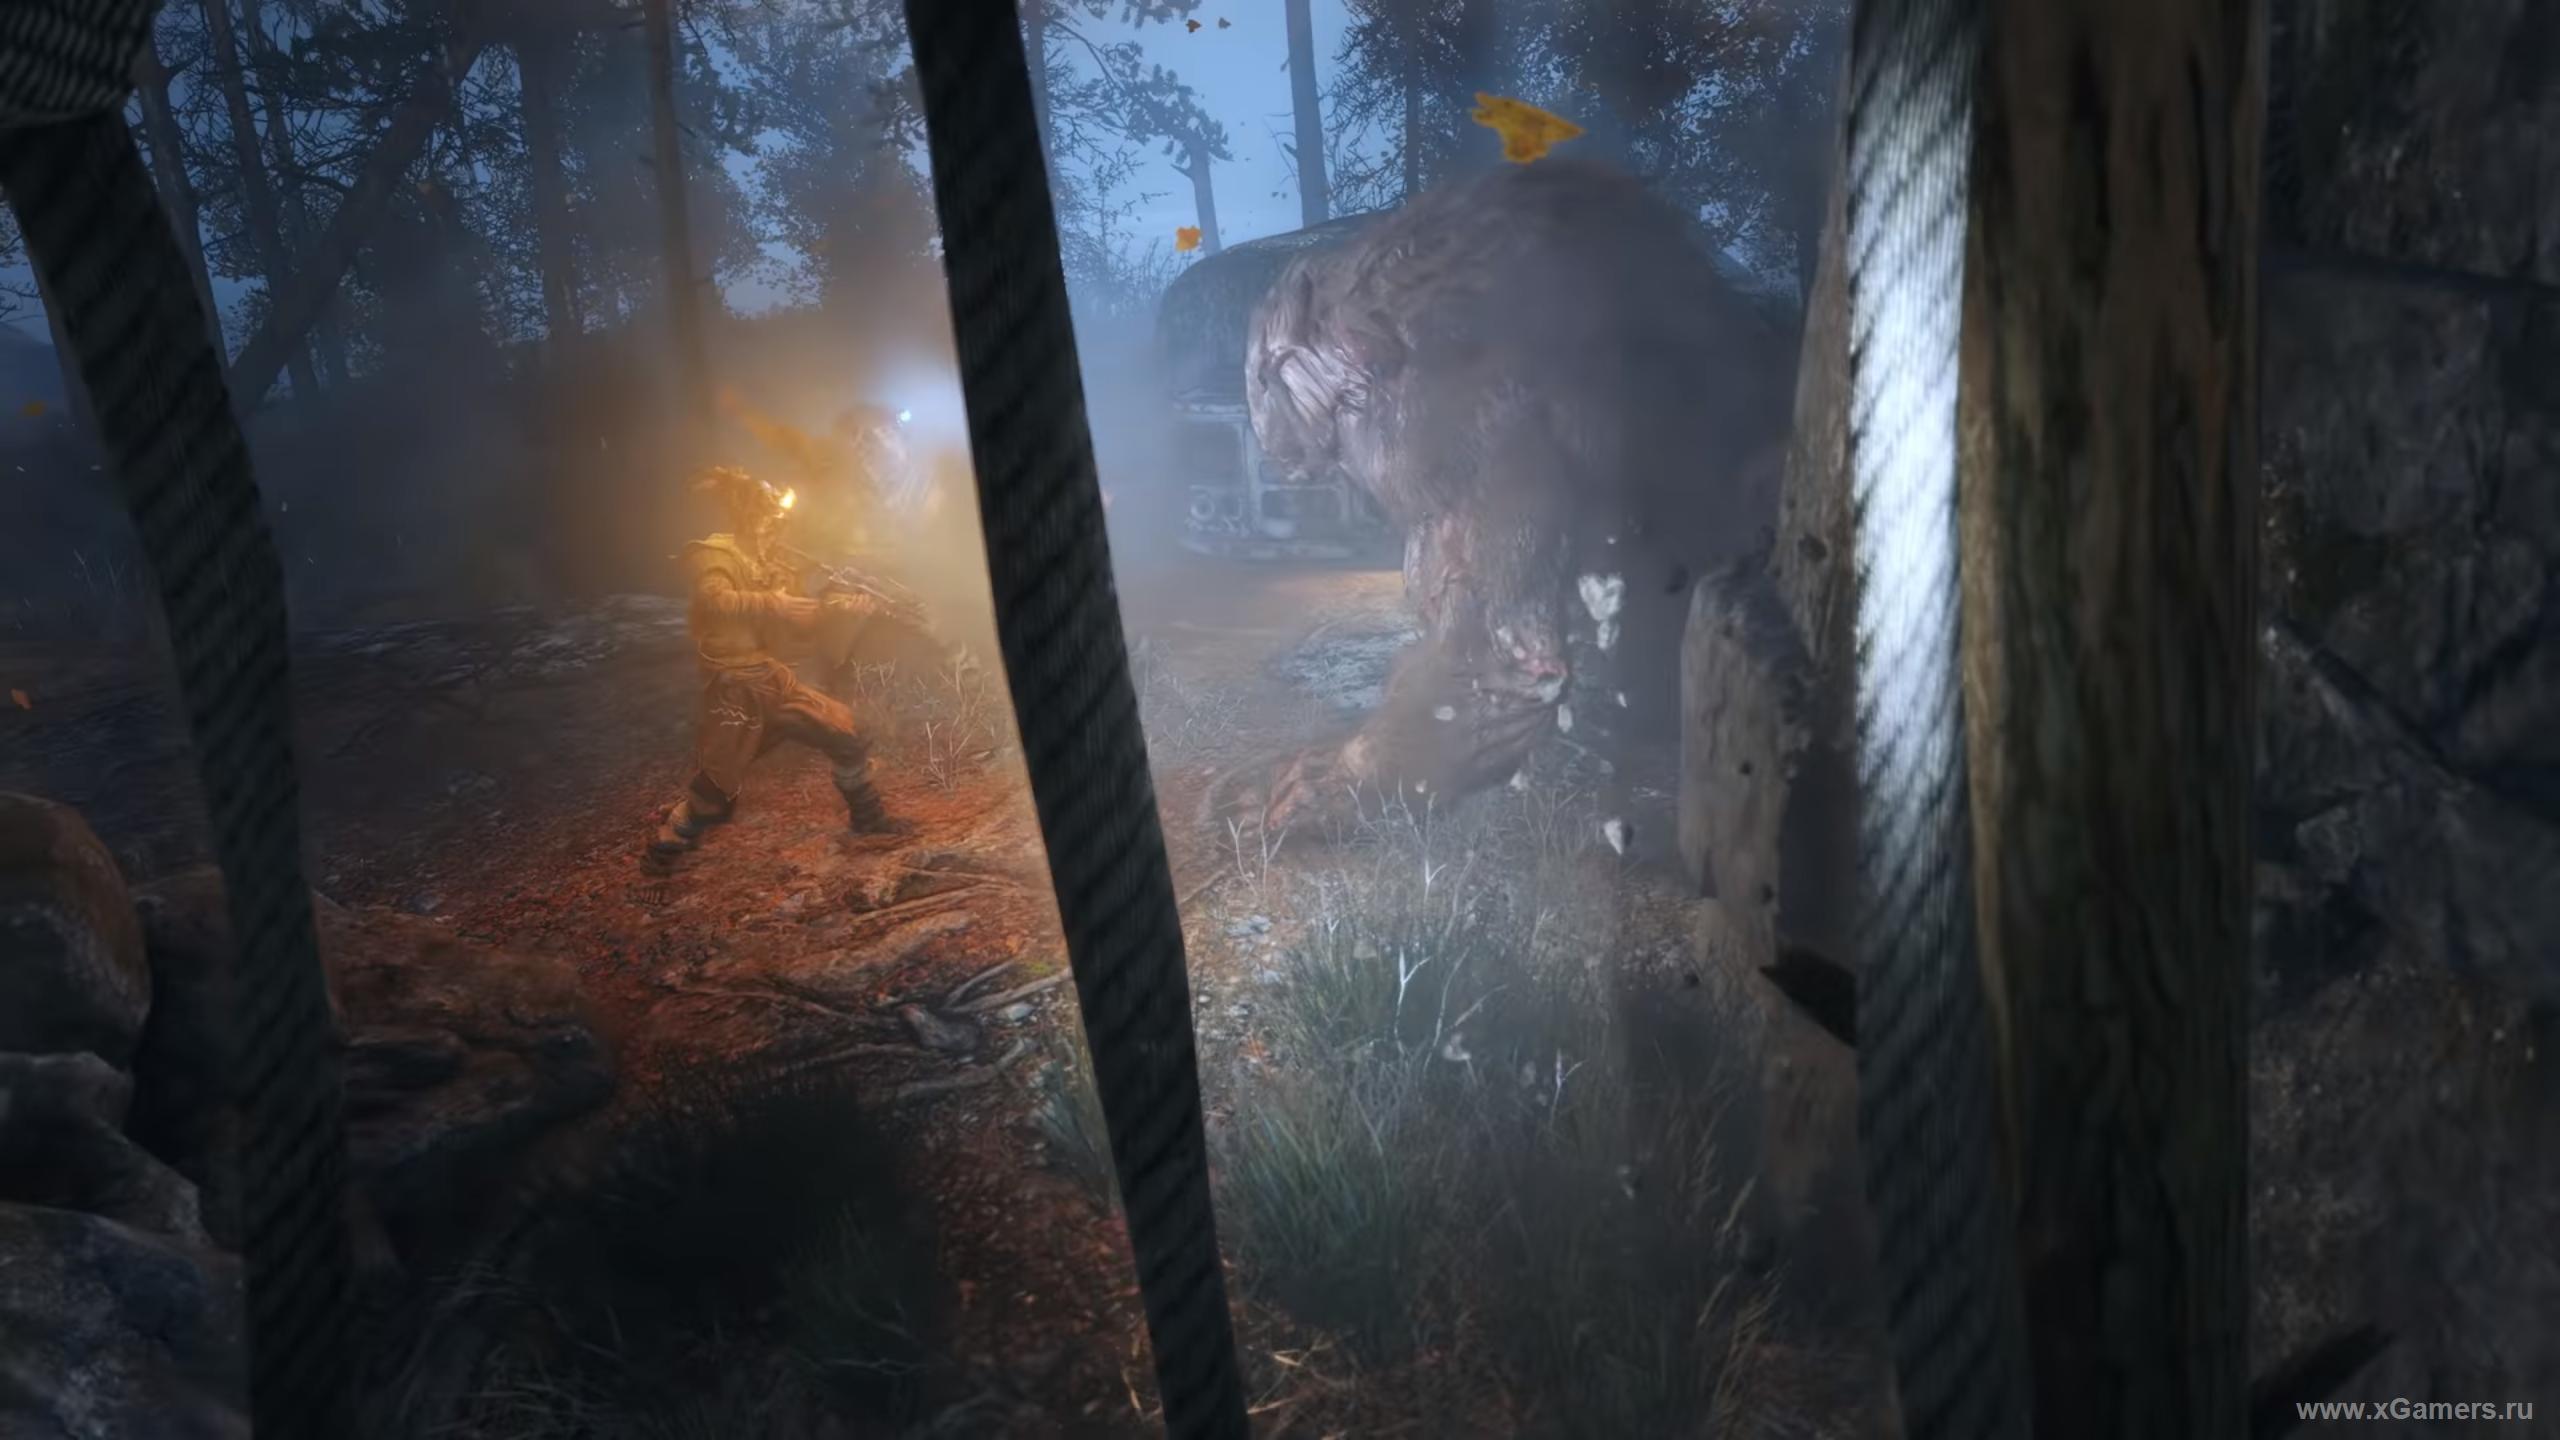 Captured by teenage pirates, bear attack